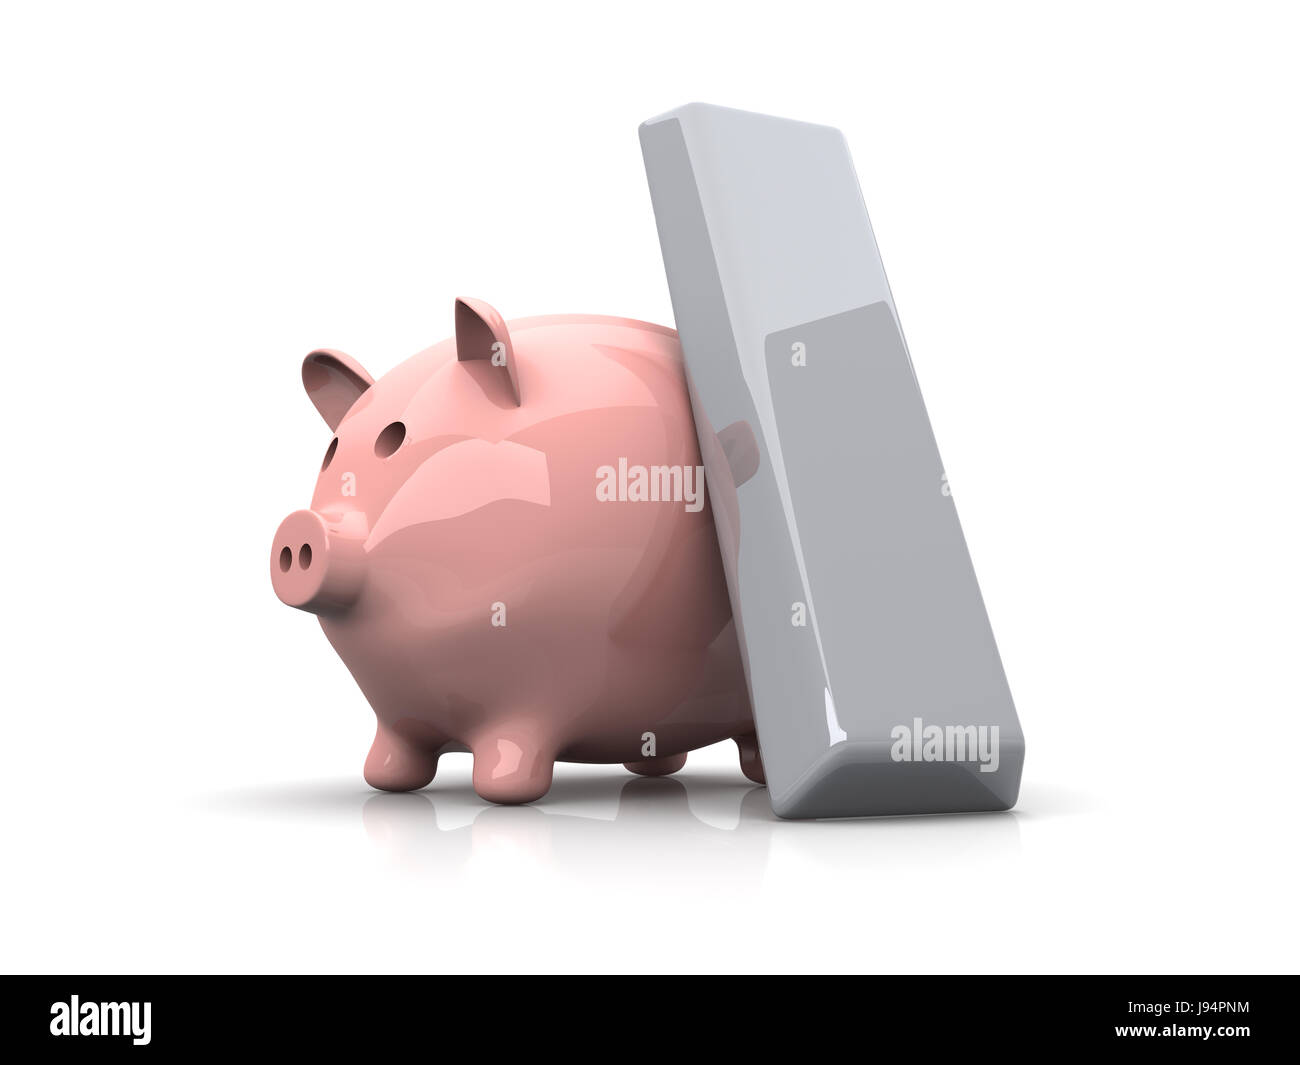 bank, lending institution, isolated, currency, graphic, silver, save, toy, Stock Photo